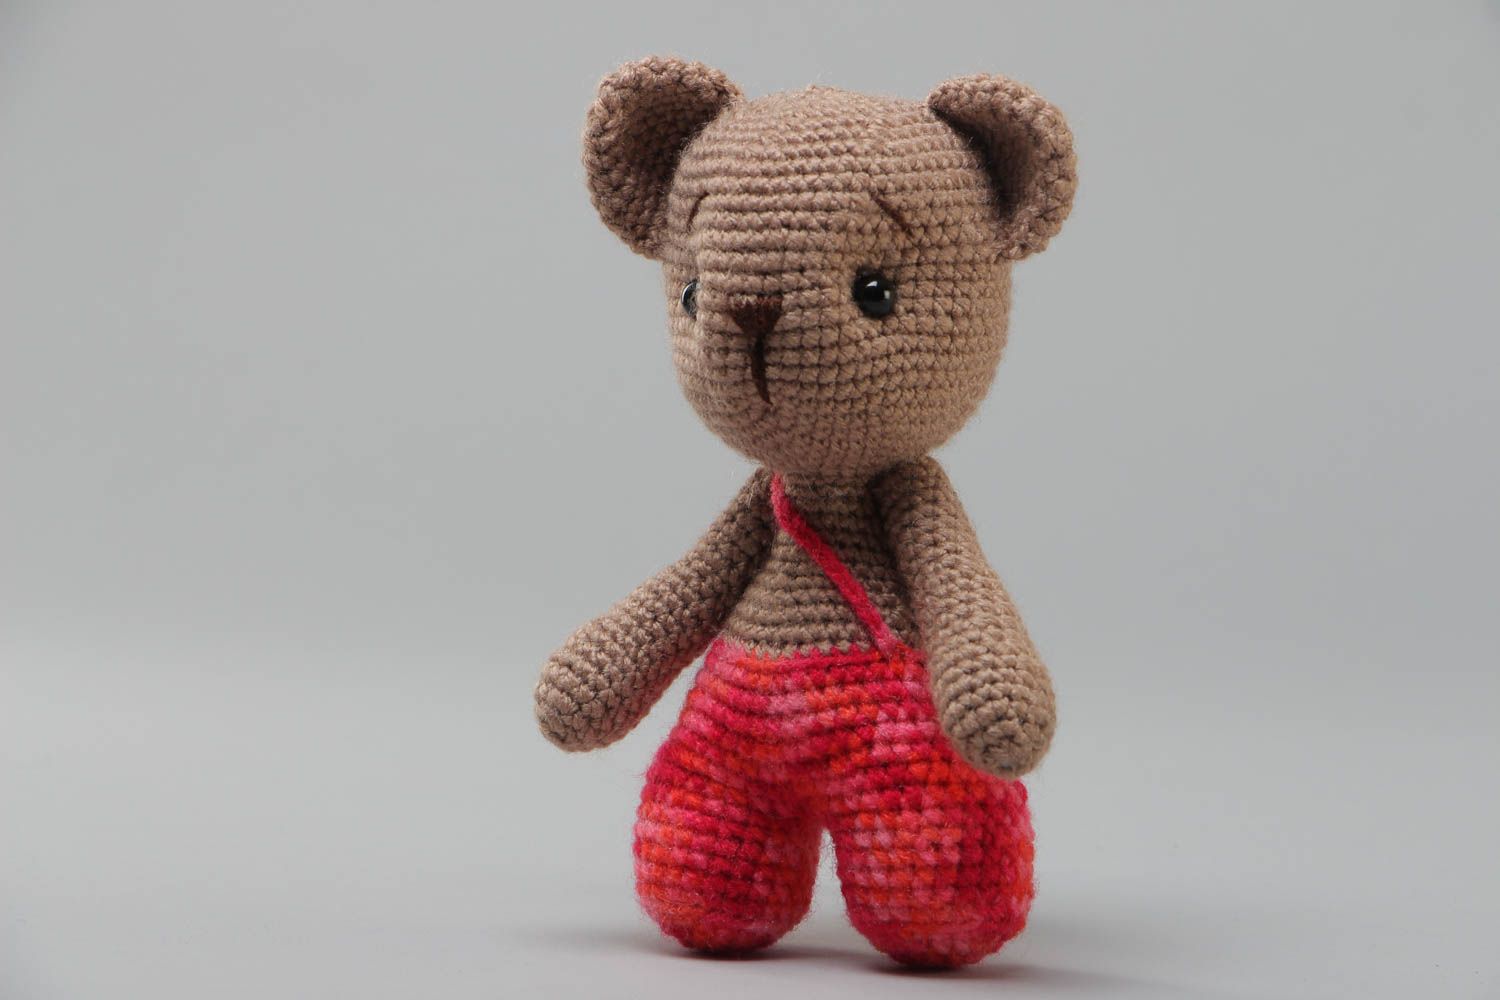 Small handcrafted soft crocheted teddybear for children made using knitting needle photo 2